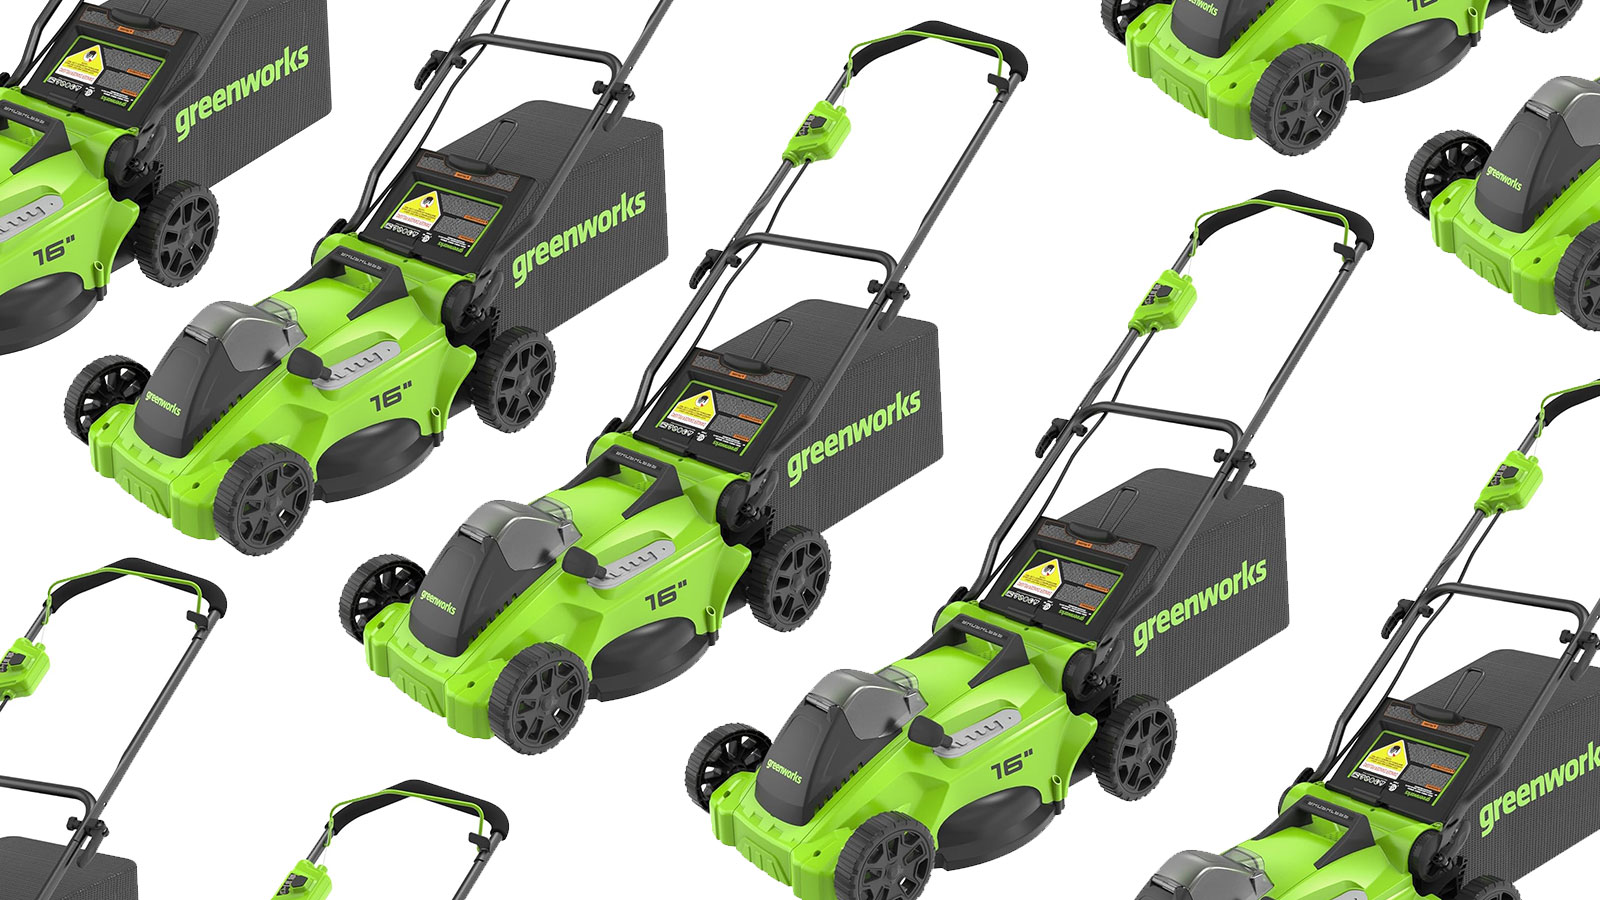 Greenworks lawnmowers arranged on a plain background